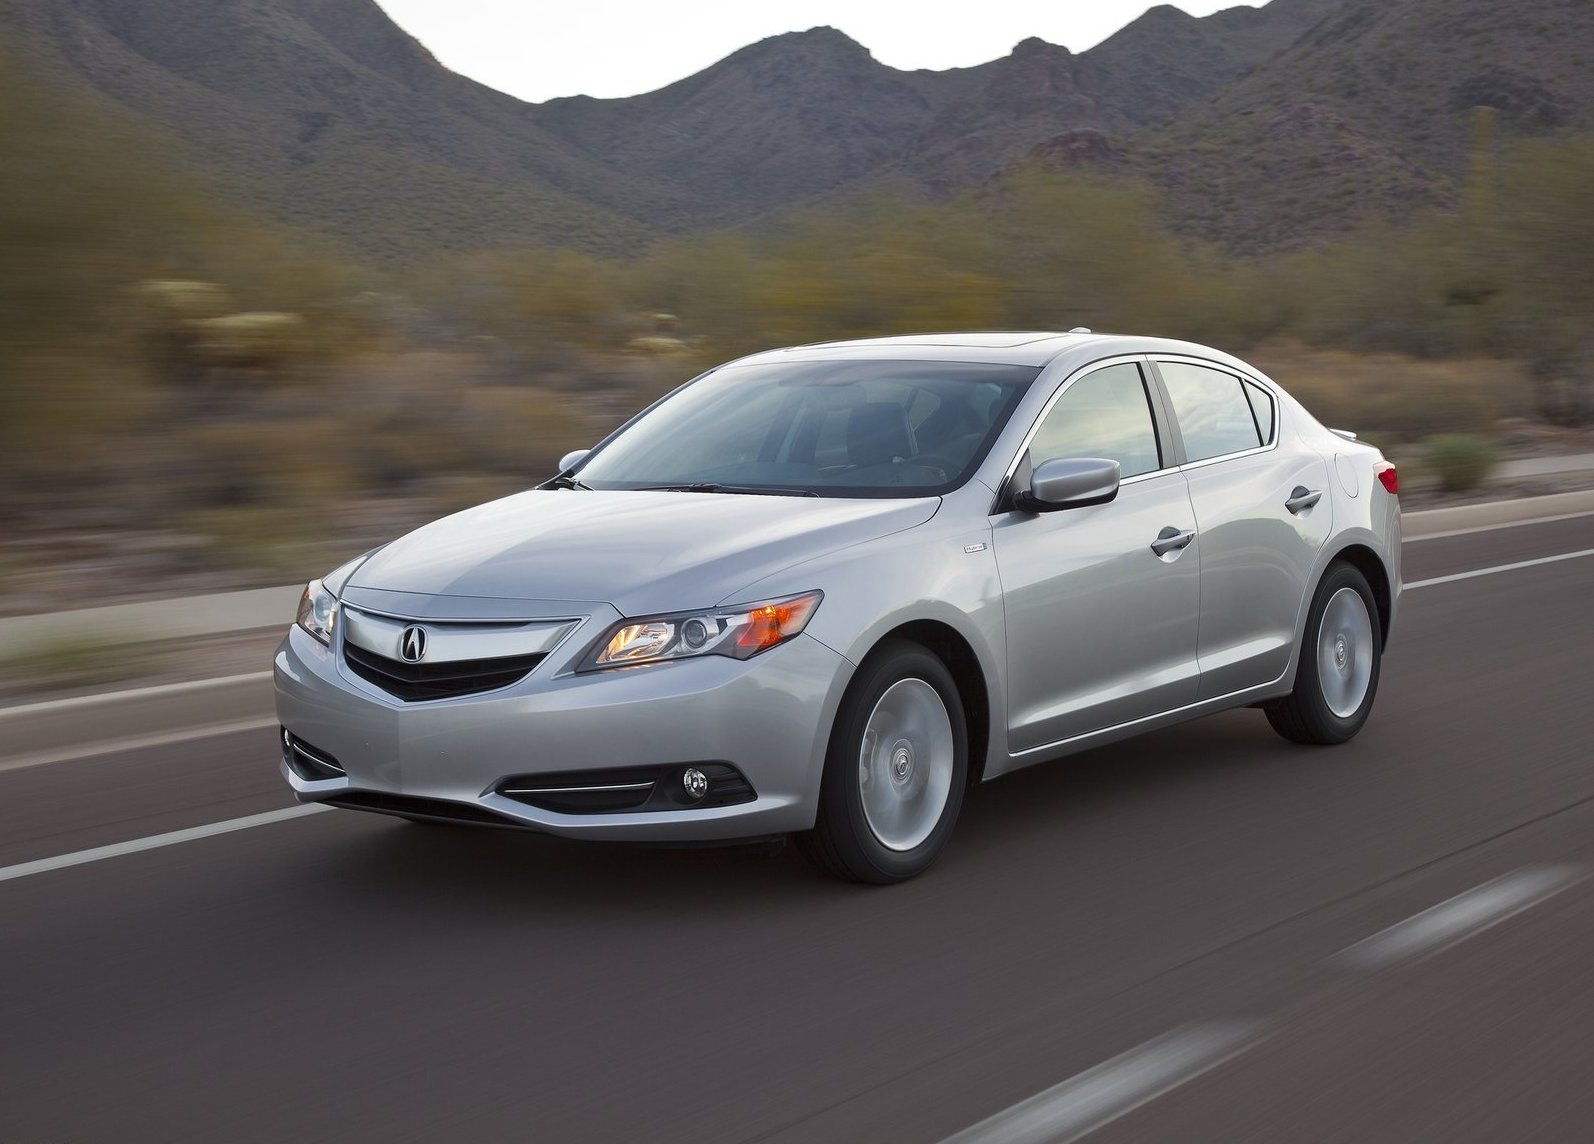 The 2014 Acura Ilx Hybrid Is A Reliable And Forgotten Fuel Saver